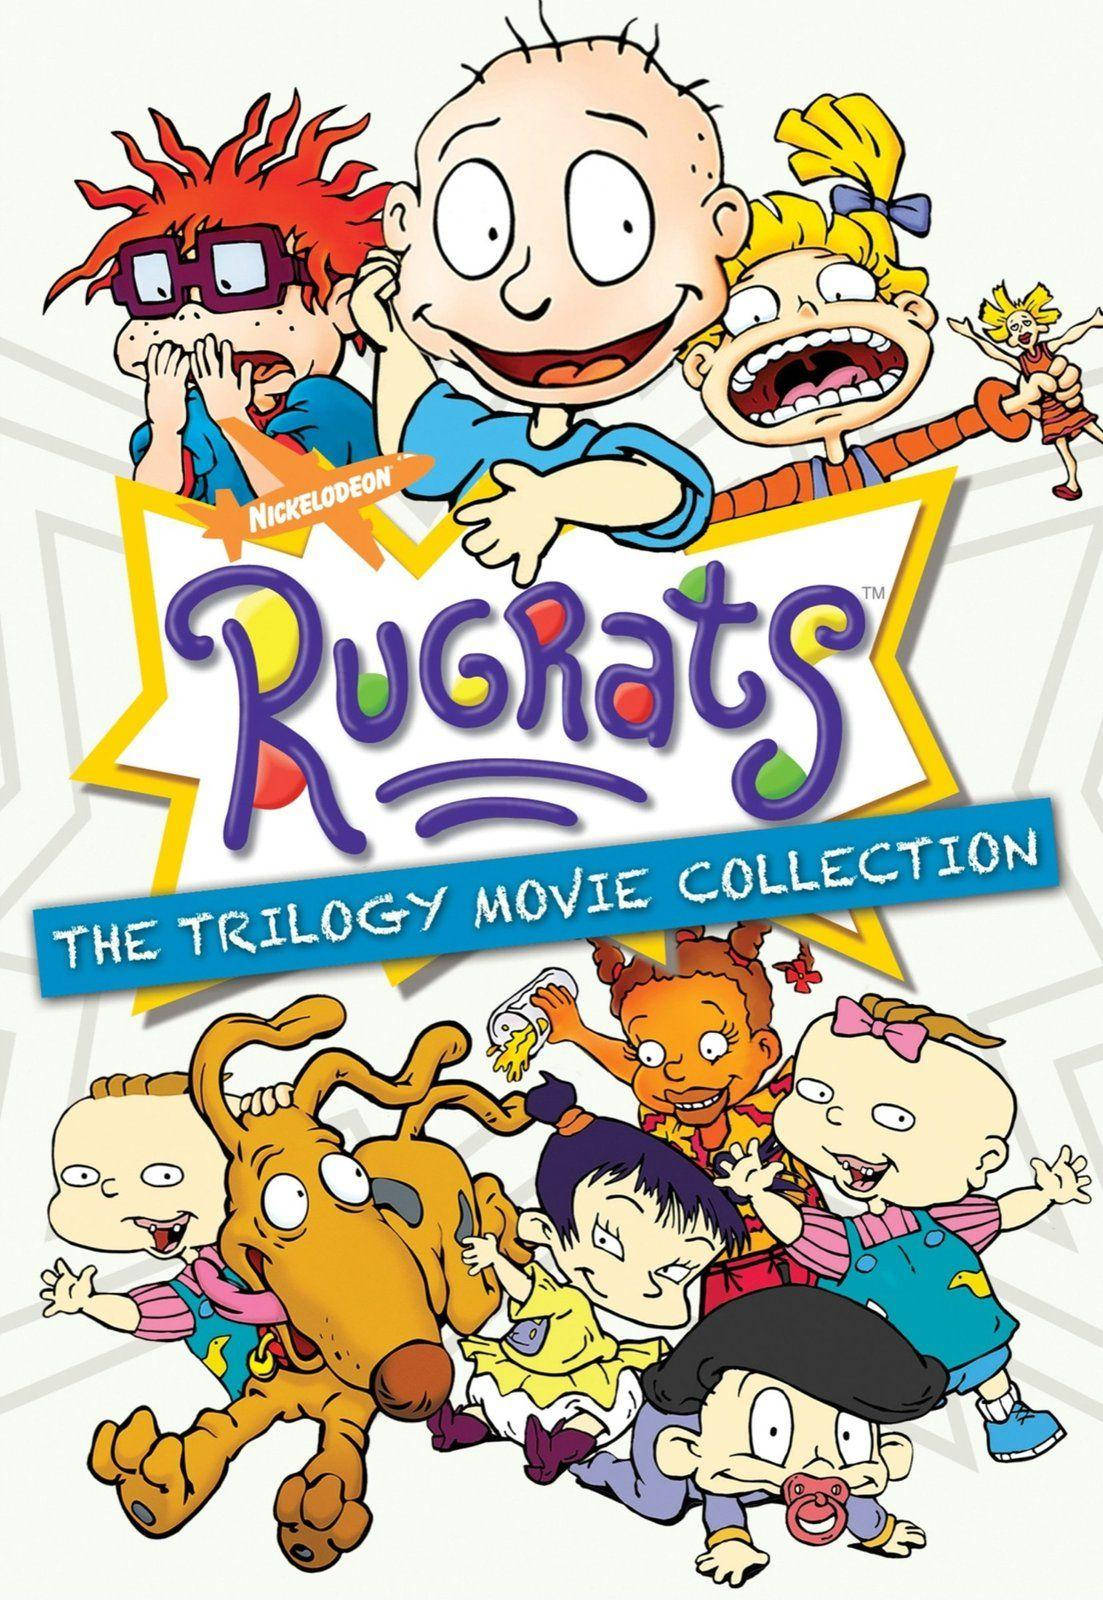 Rufats The Trilogy Movie Collection Background